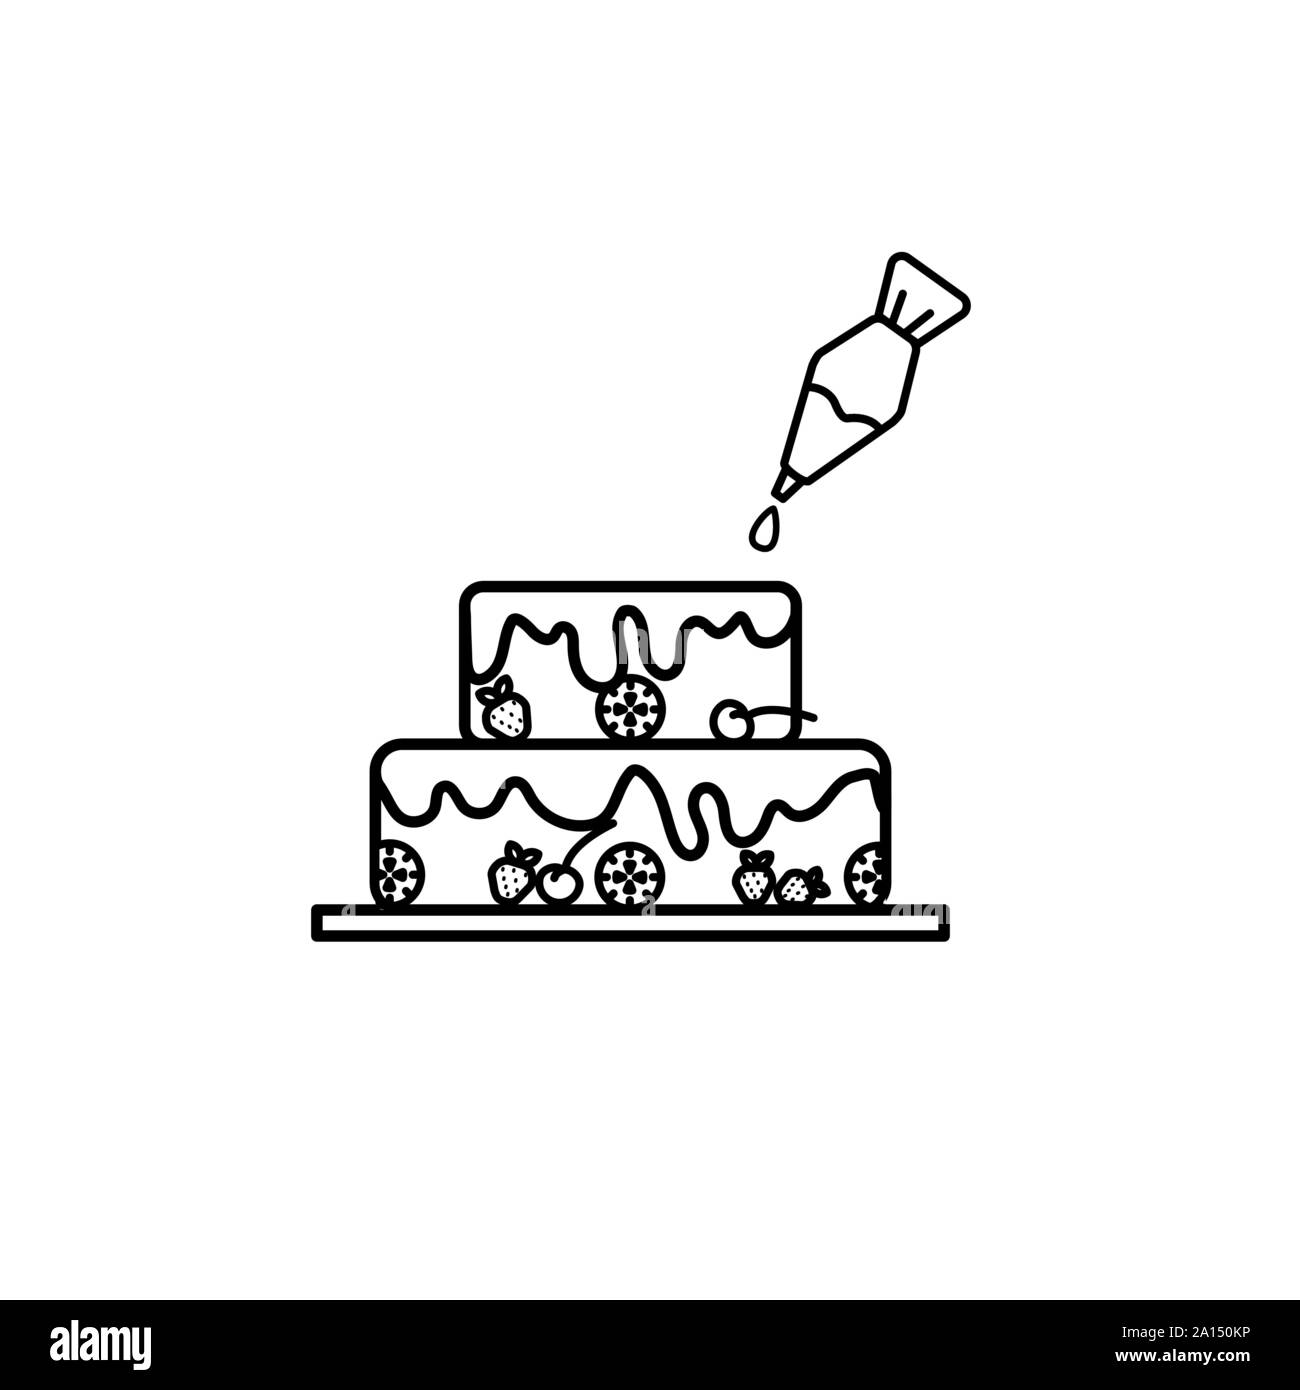 Cake with pastry syringe in line art design isolated Stock Vector